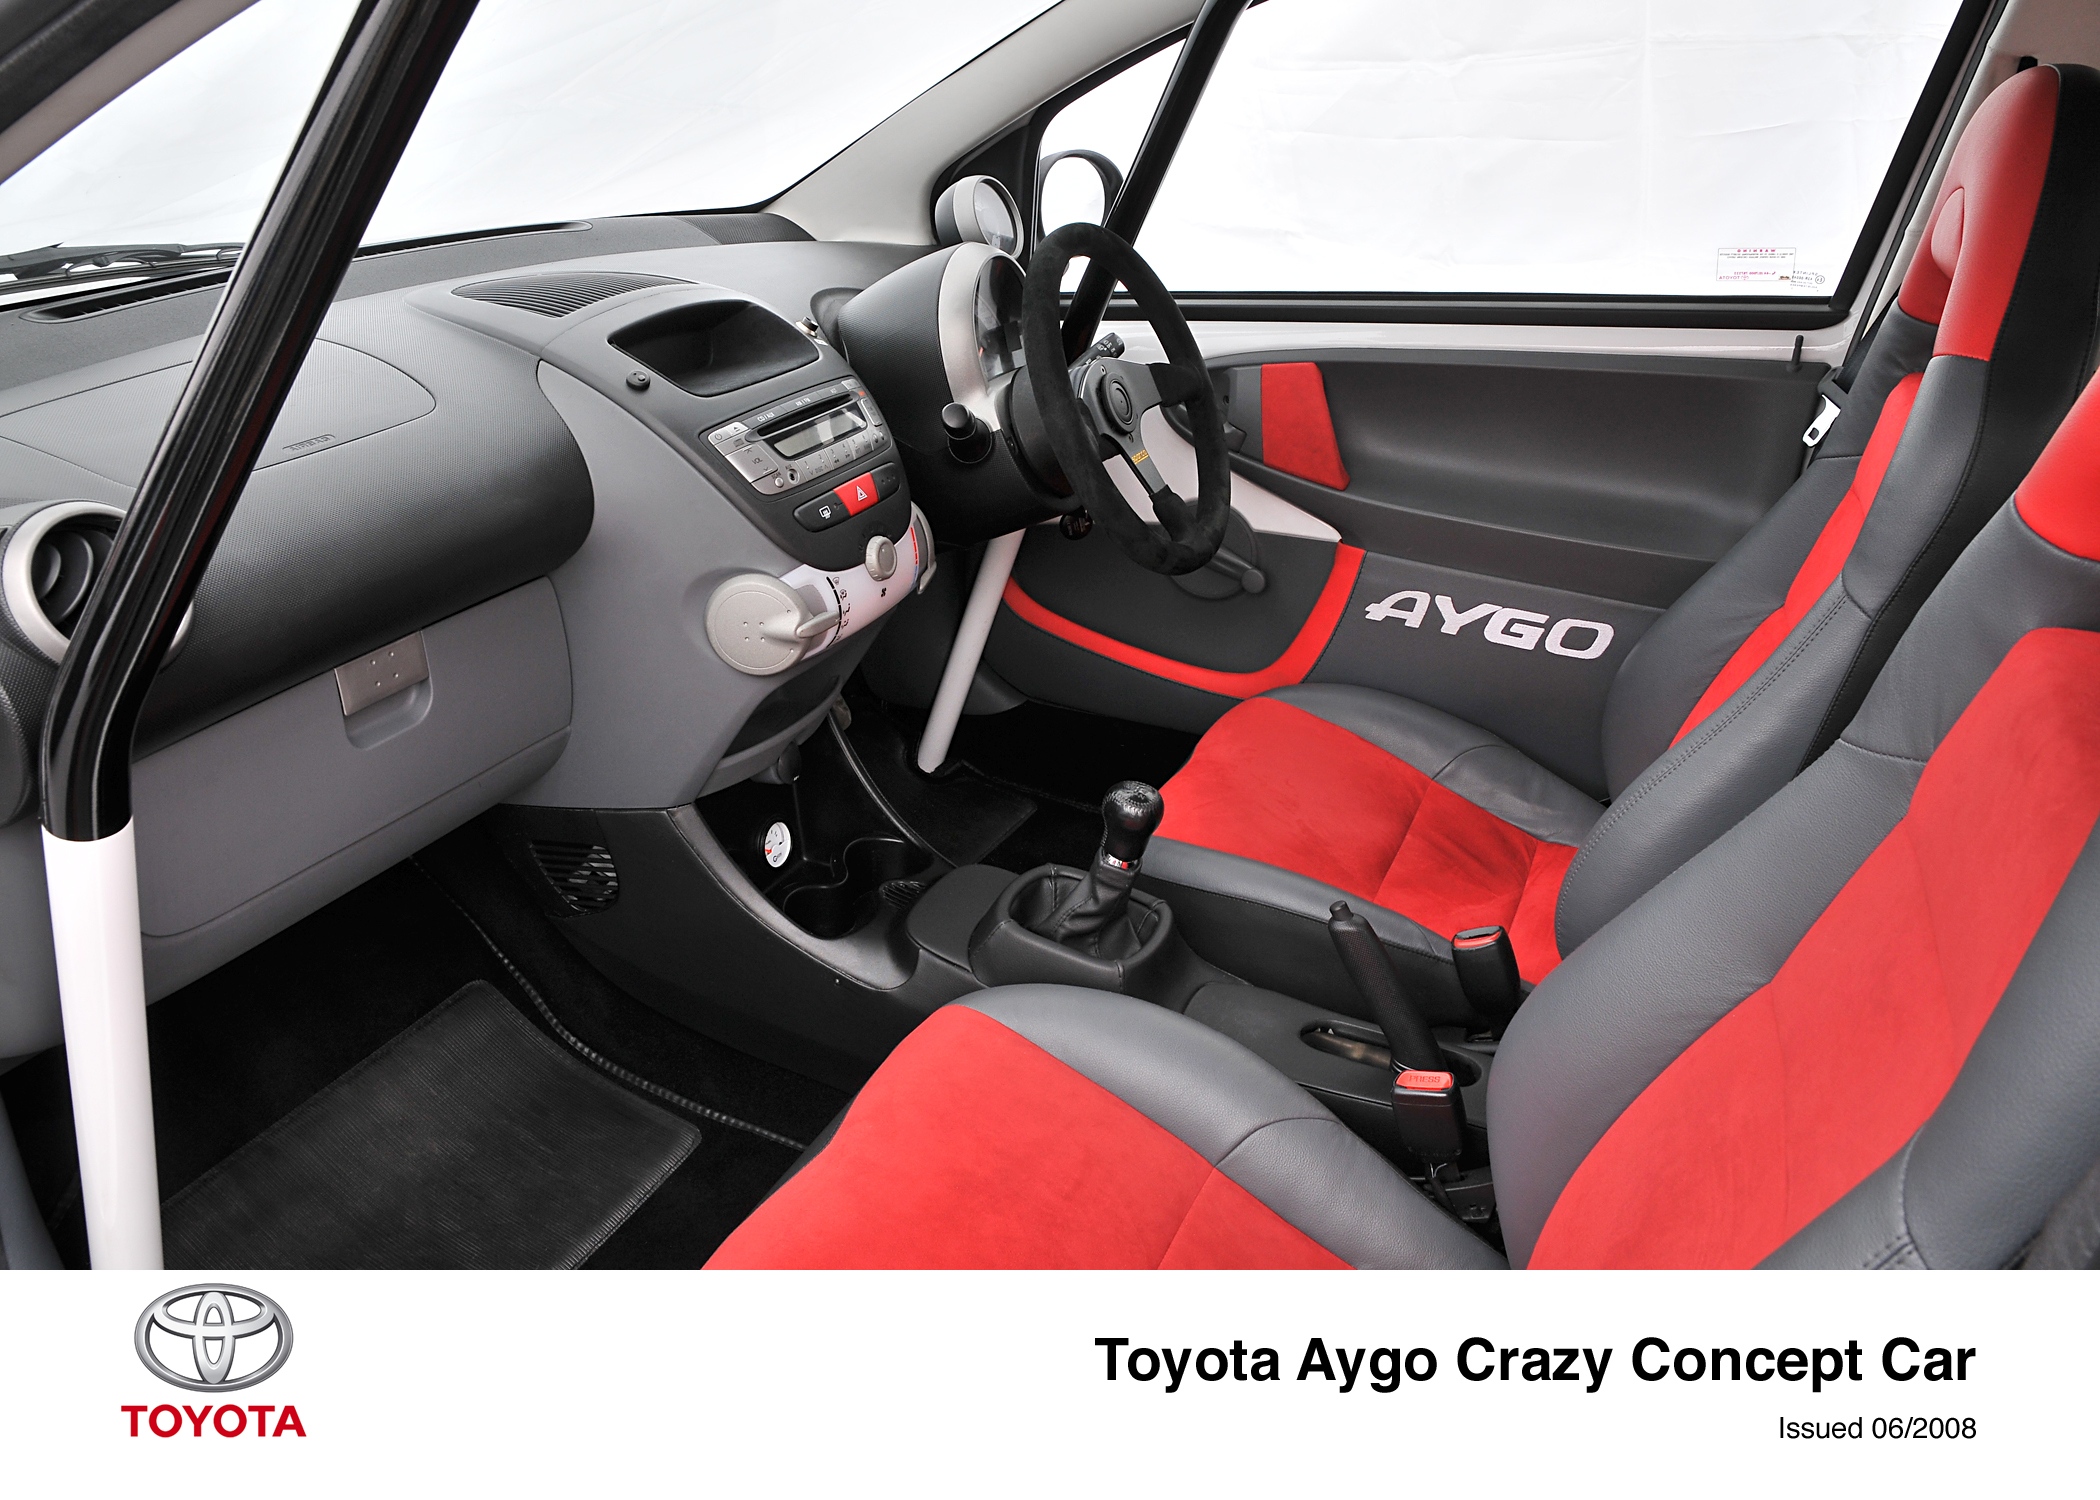 Aygo Crazy' Concept Car To Make World Premiere At London Motor